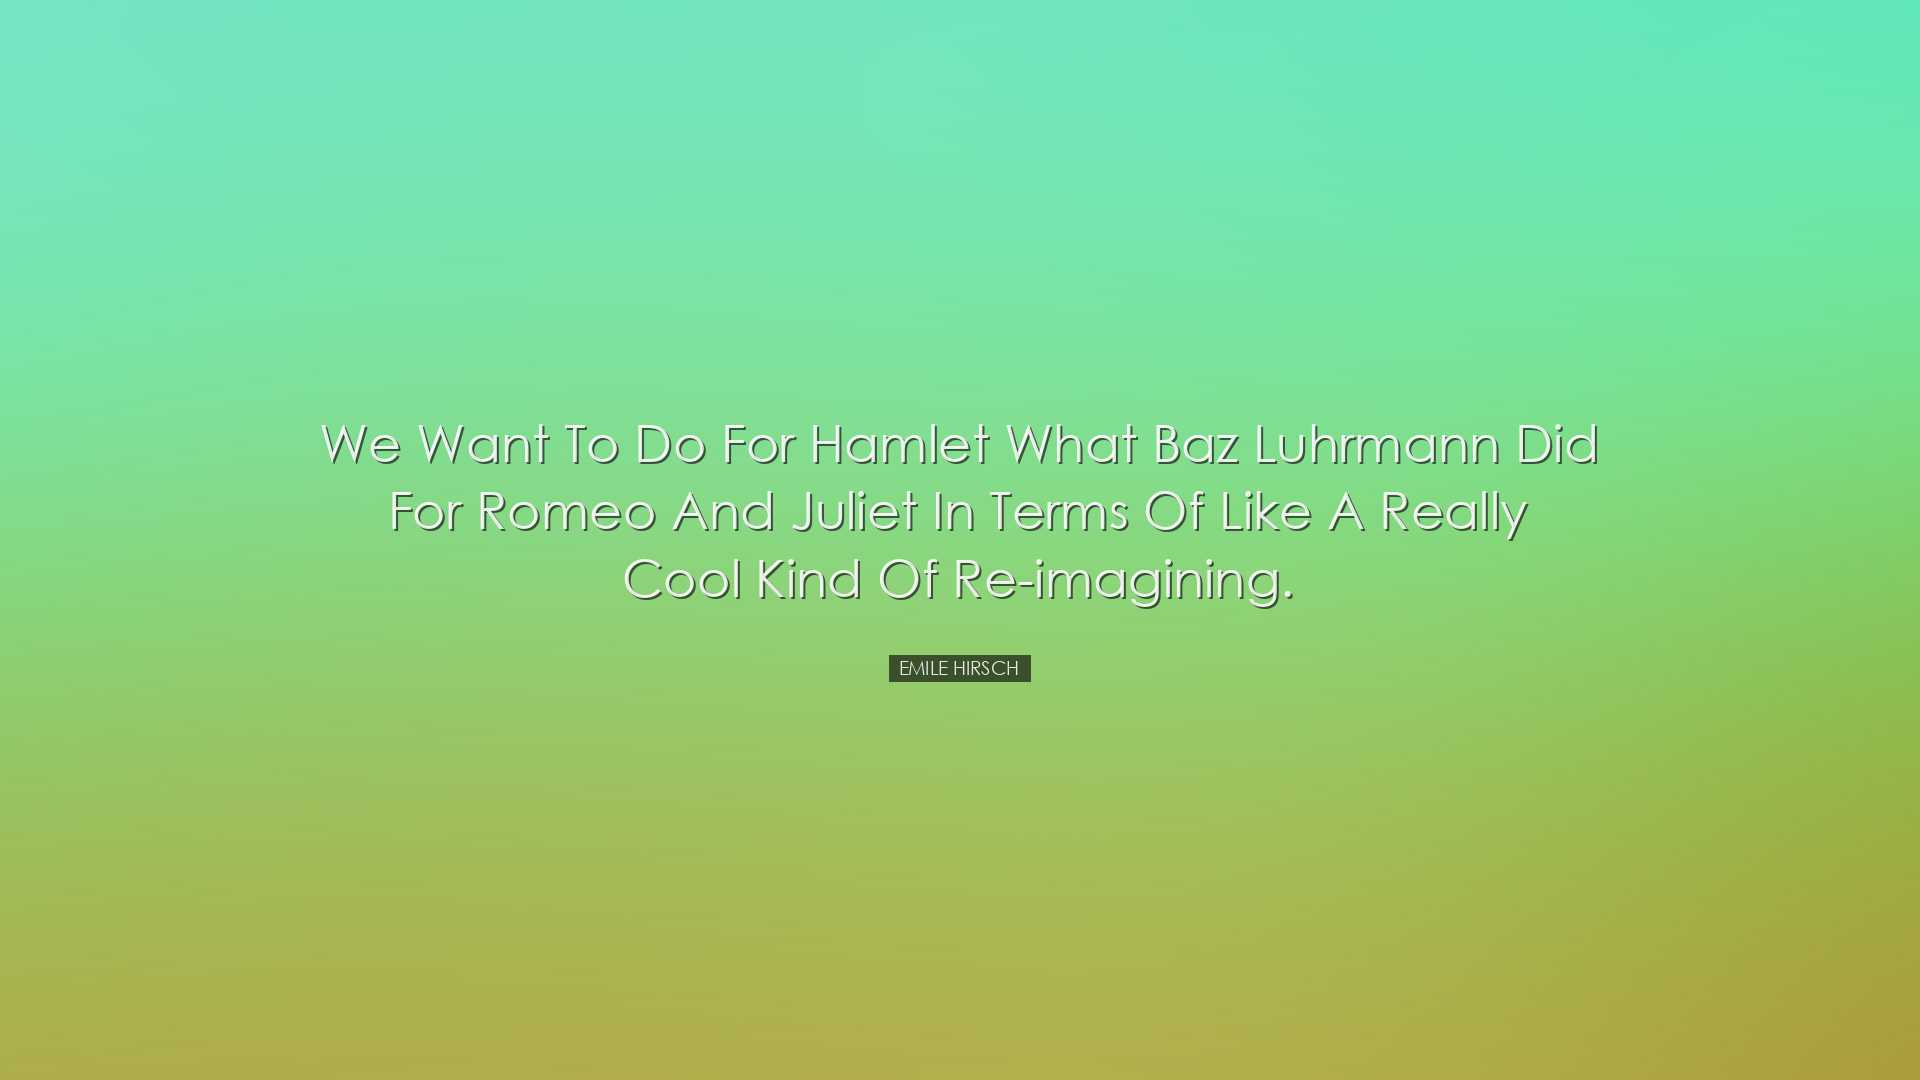 We want to do for Hamlet what Baz Luhrmann did for Romeo and Julie